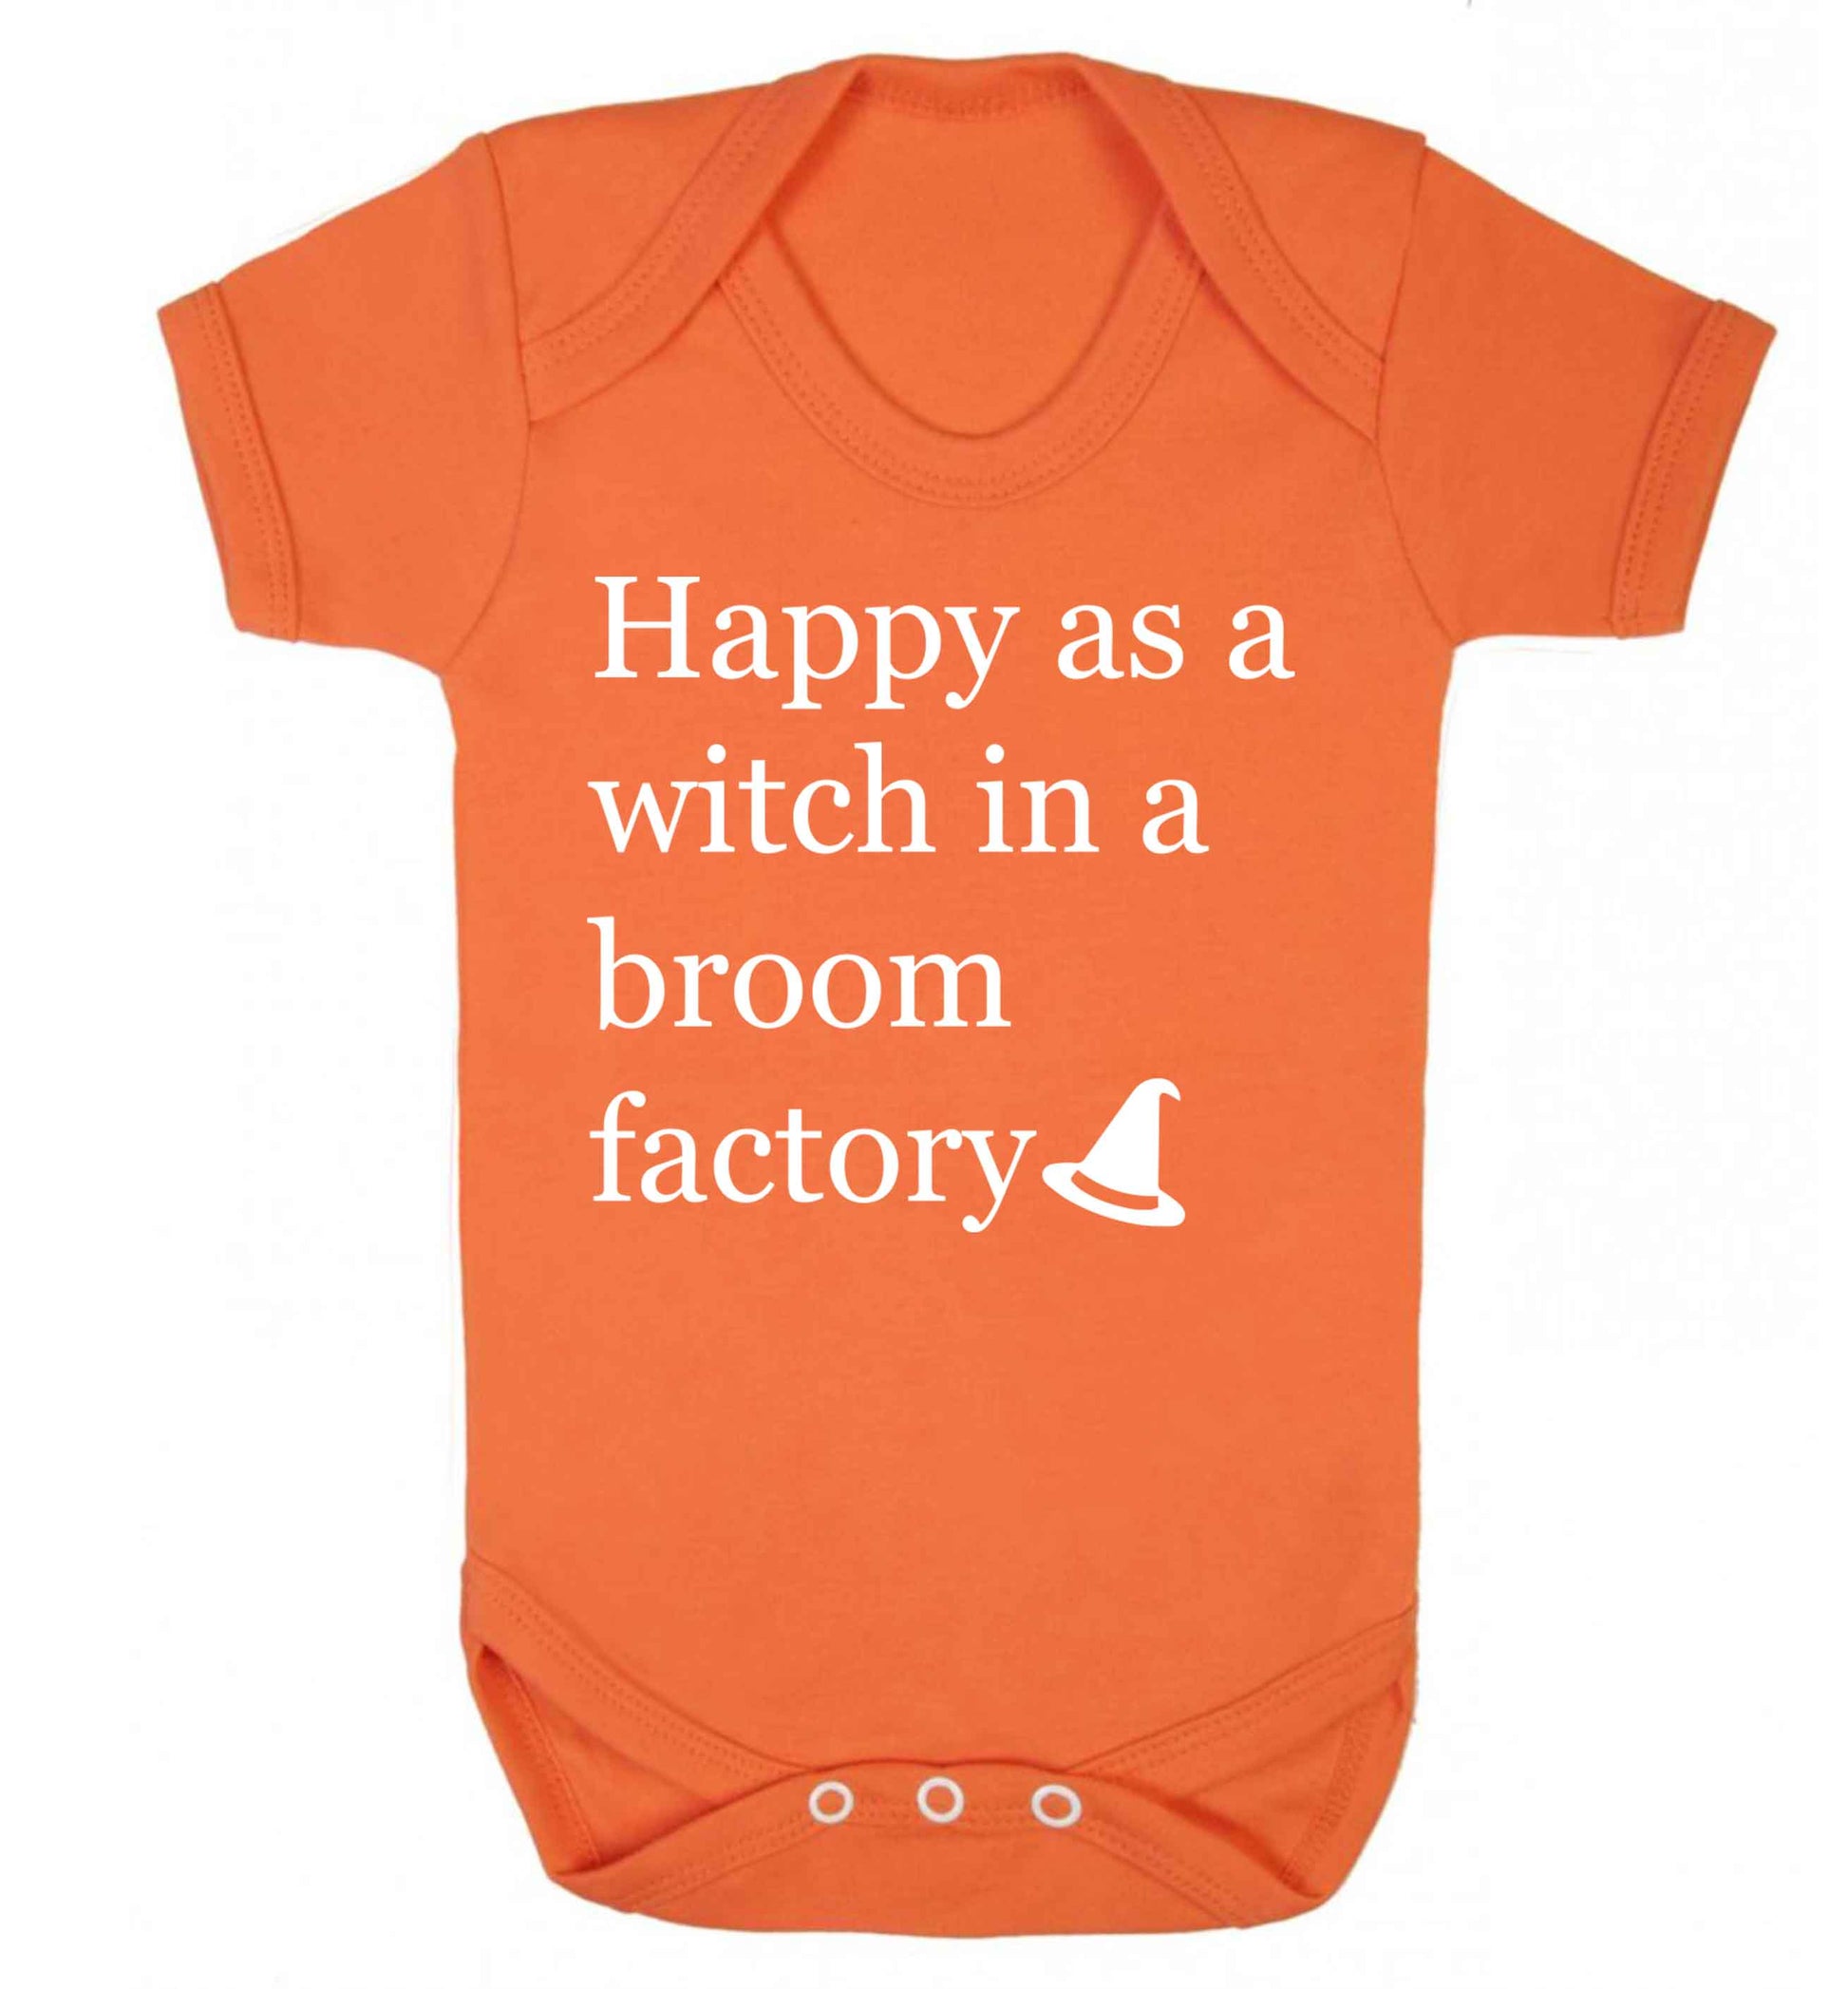 Happy as a witch in a broom factory Baby Vest orange 18-24 months